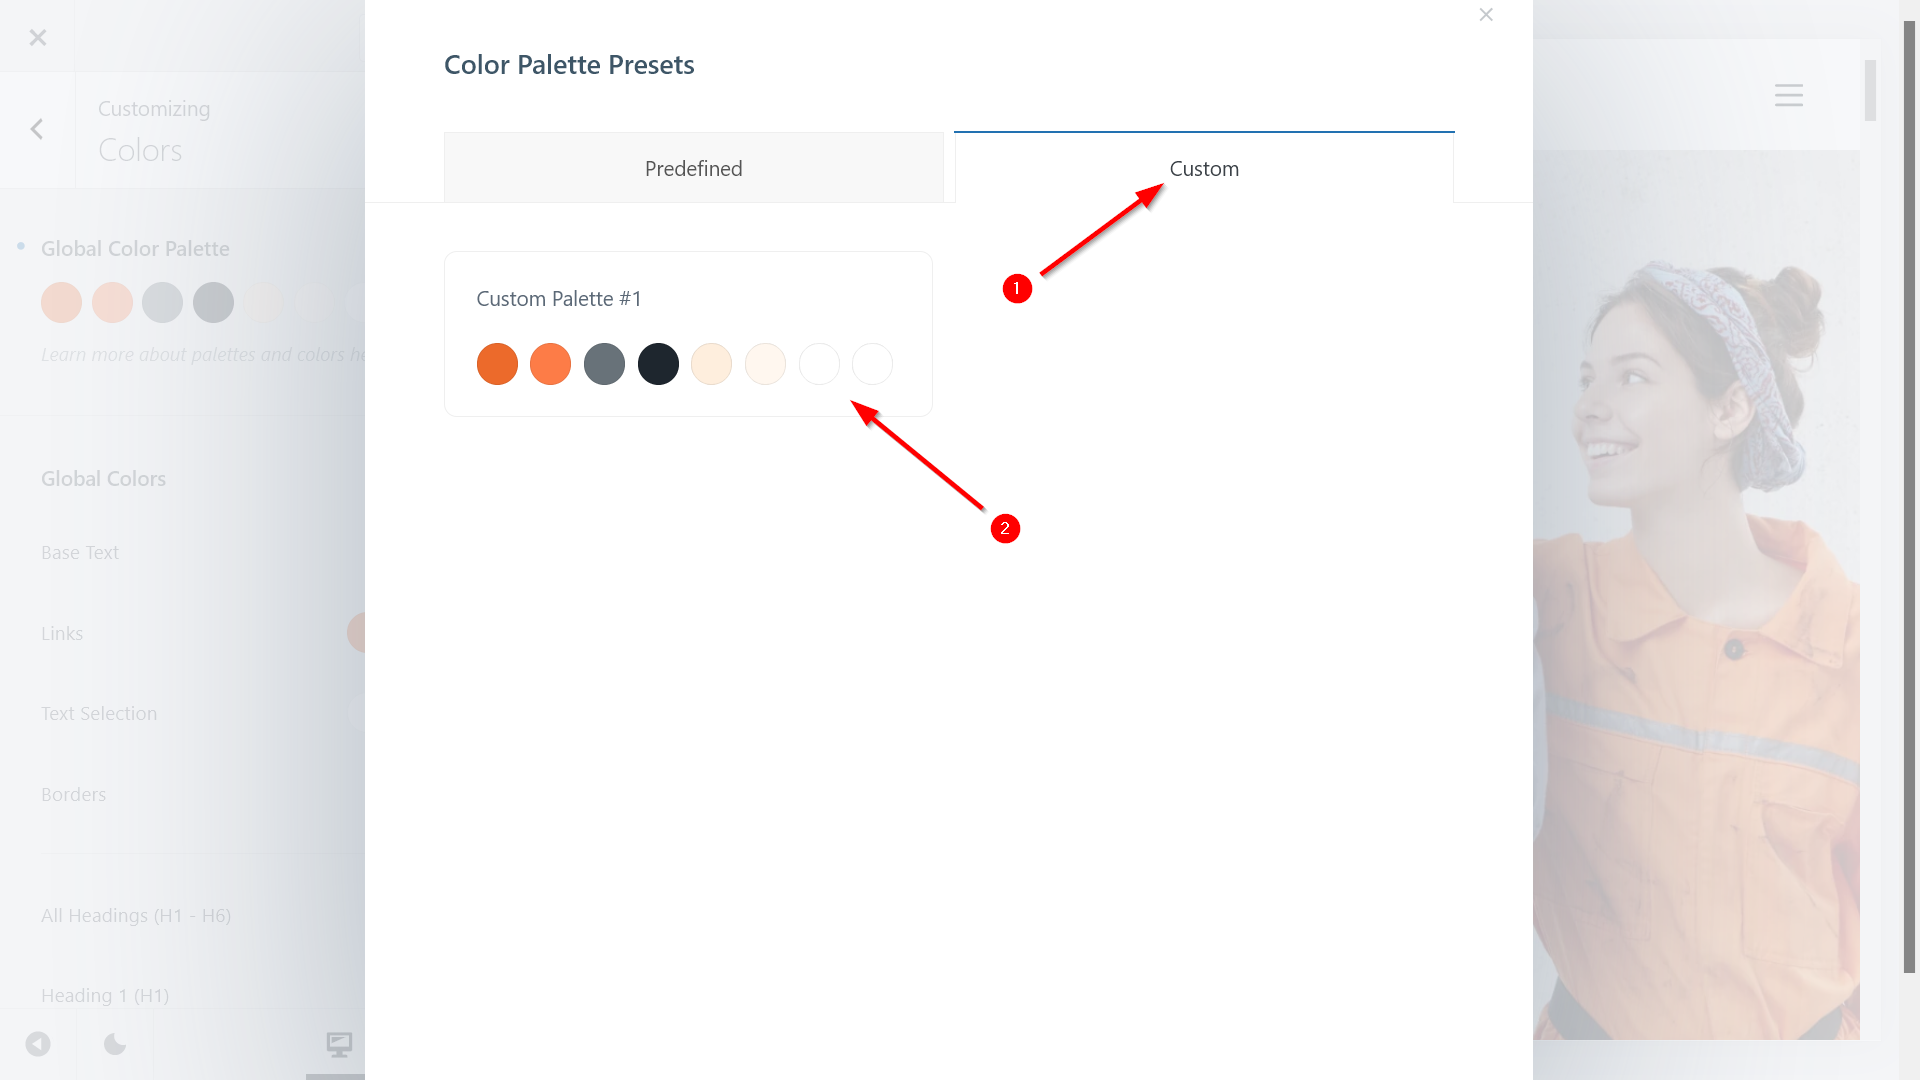 The Custom tab of the Color Palette Presets modal with the saved custom palette